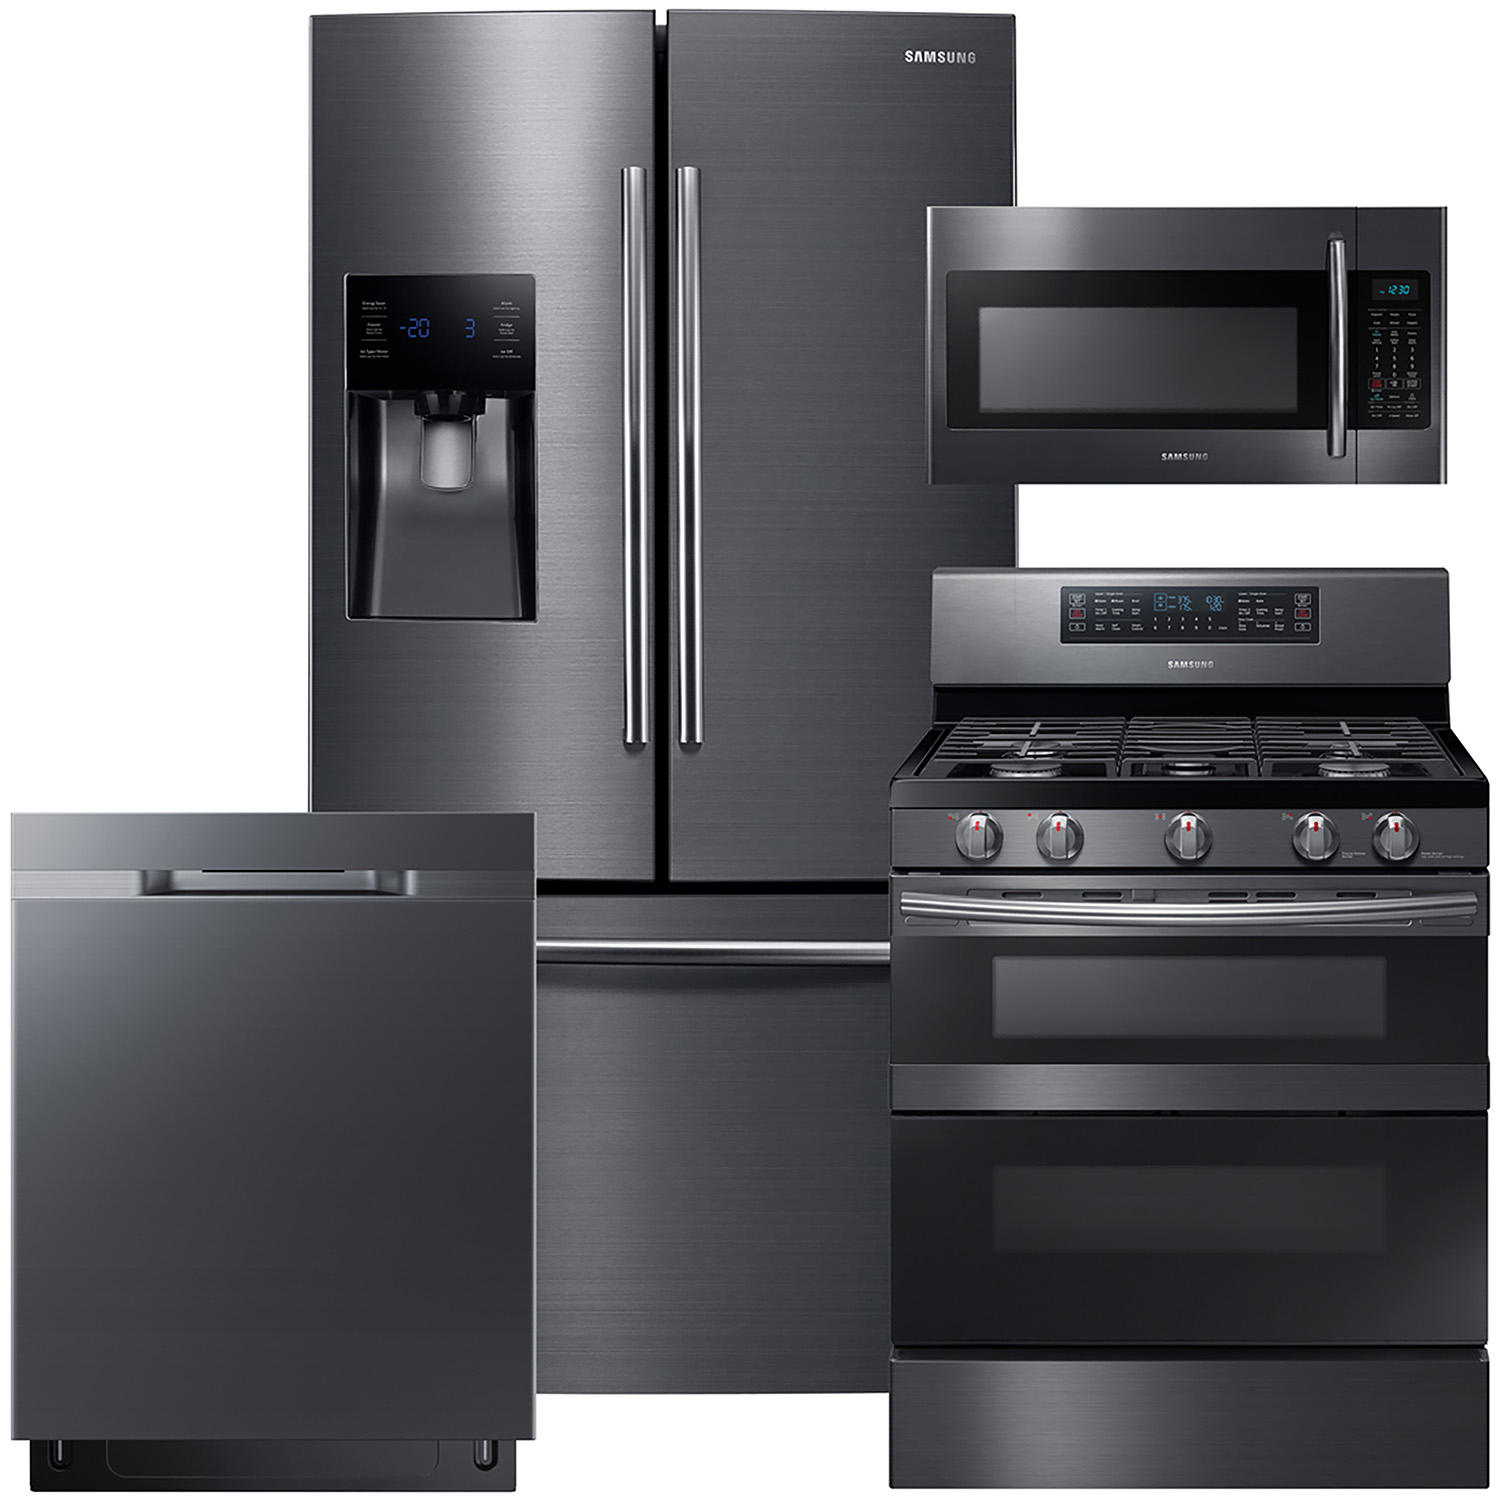 SAMSUNG 3-Door Refrigerator, Flex Duo Electric Range, Microwave, and Dishwasher Package in Black Stainless Steel Finish